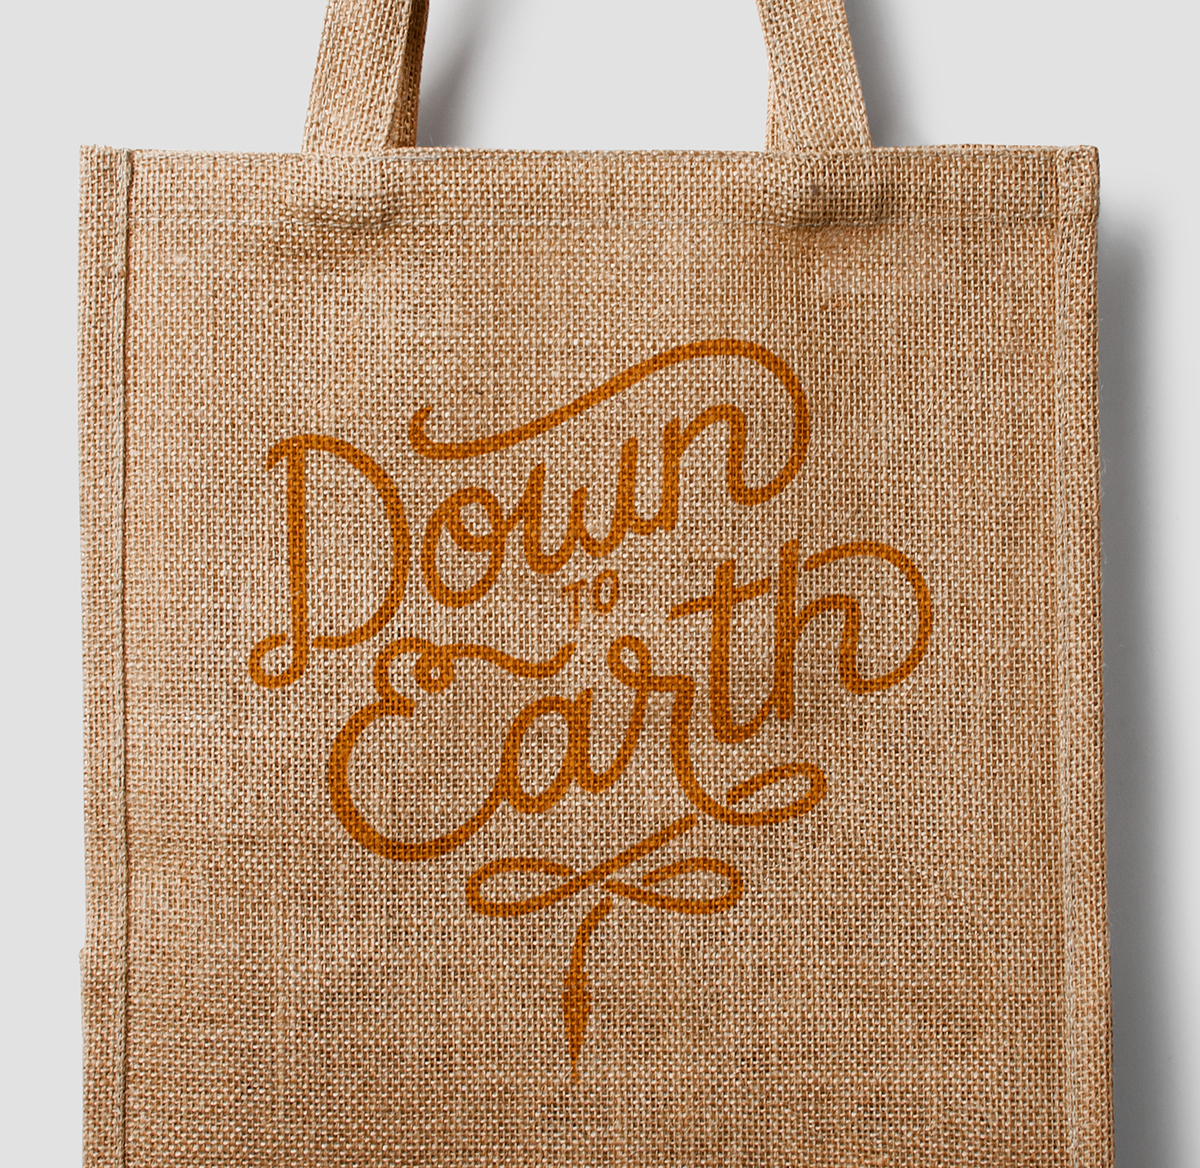 HAND LETTERING hand type type design design Typeface AIM farmer's market farm to table Marin Down to Earth Printed Material print tshirt Tote Bag